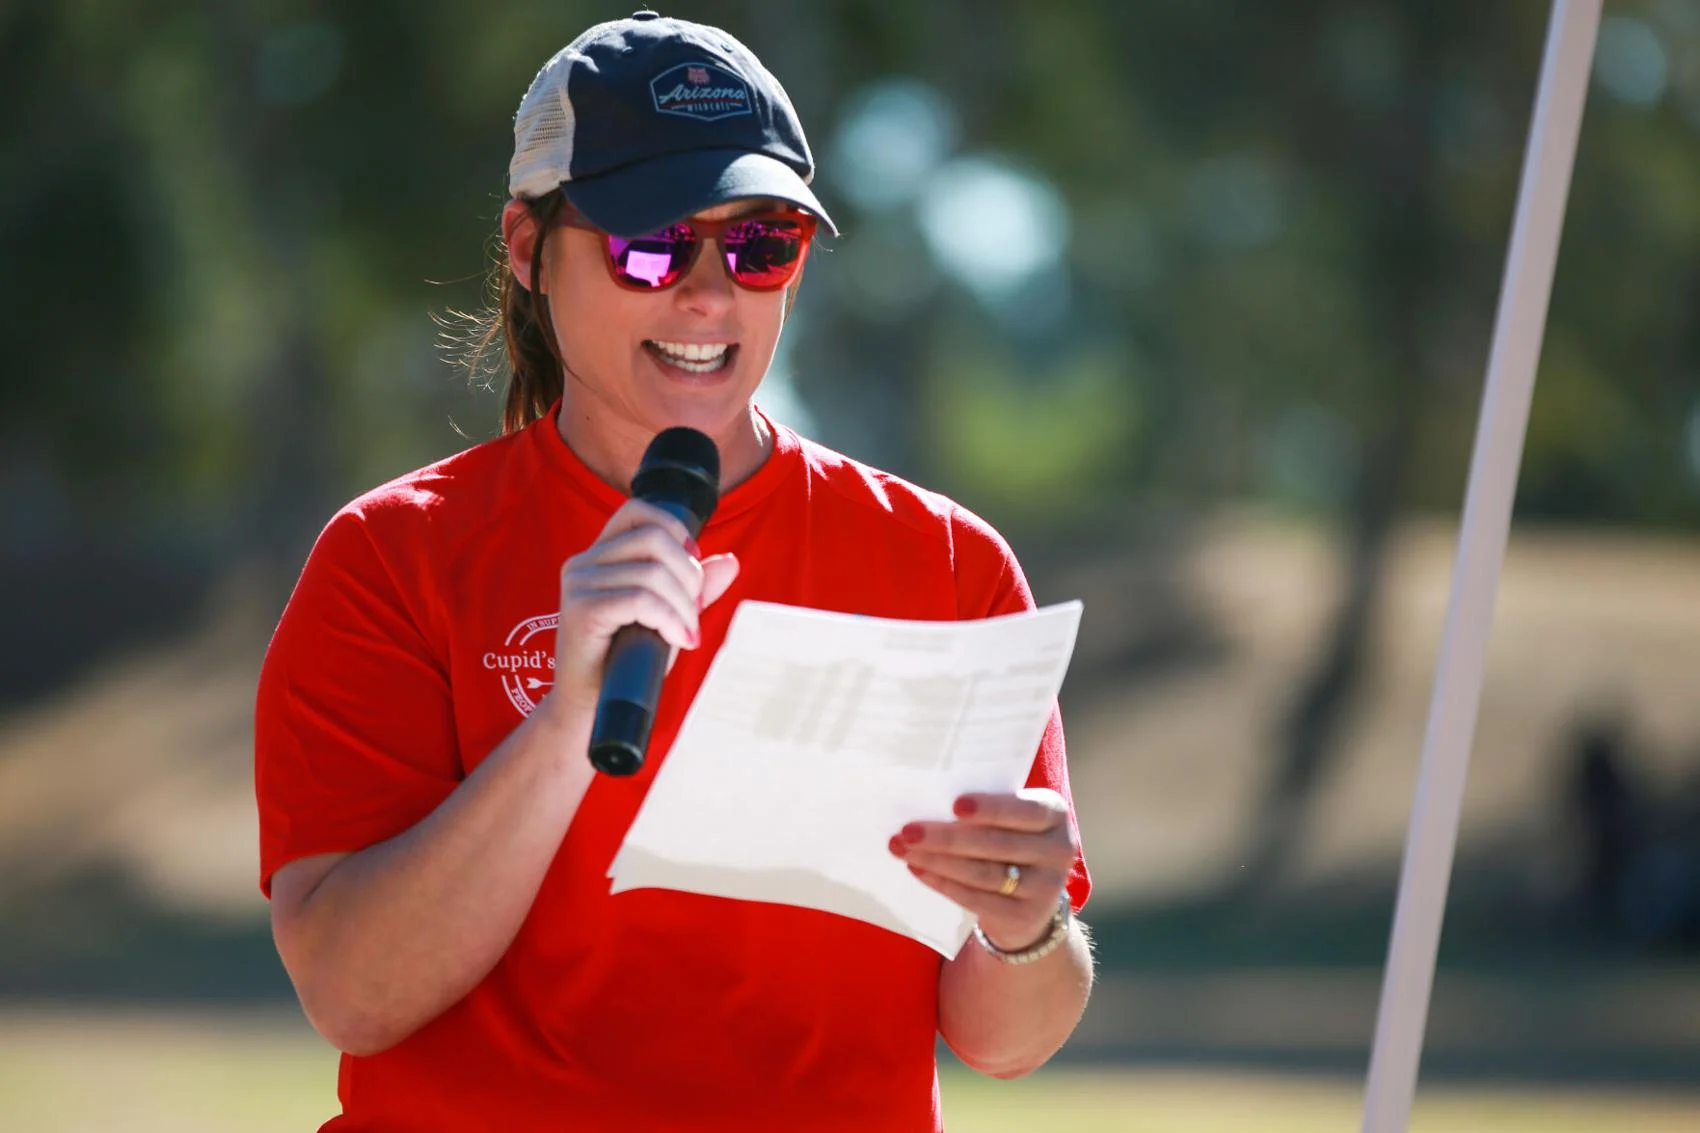 Executive director of Community Options, Inc., Kathryn Valles-Wallace announces age group winners after the Cupid's Chase 5K Run on February 12, 2022 at Reid Park. Ana Beltran, Arizona Daily Star - tucson.com